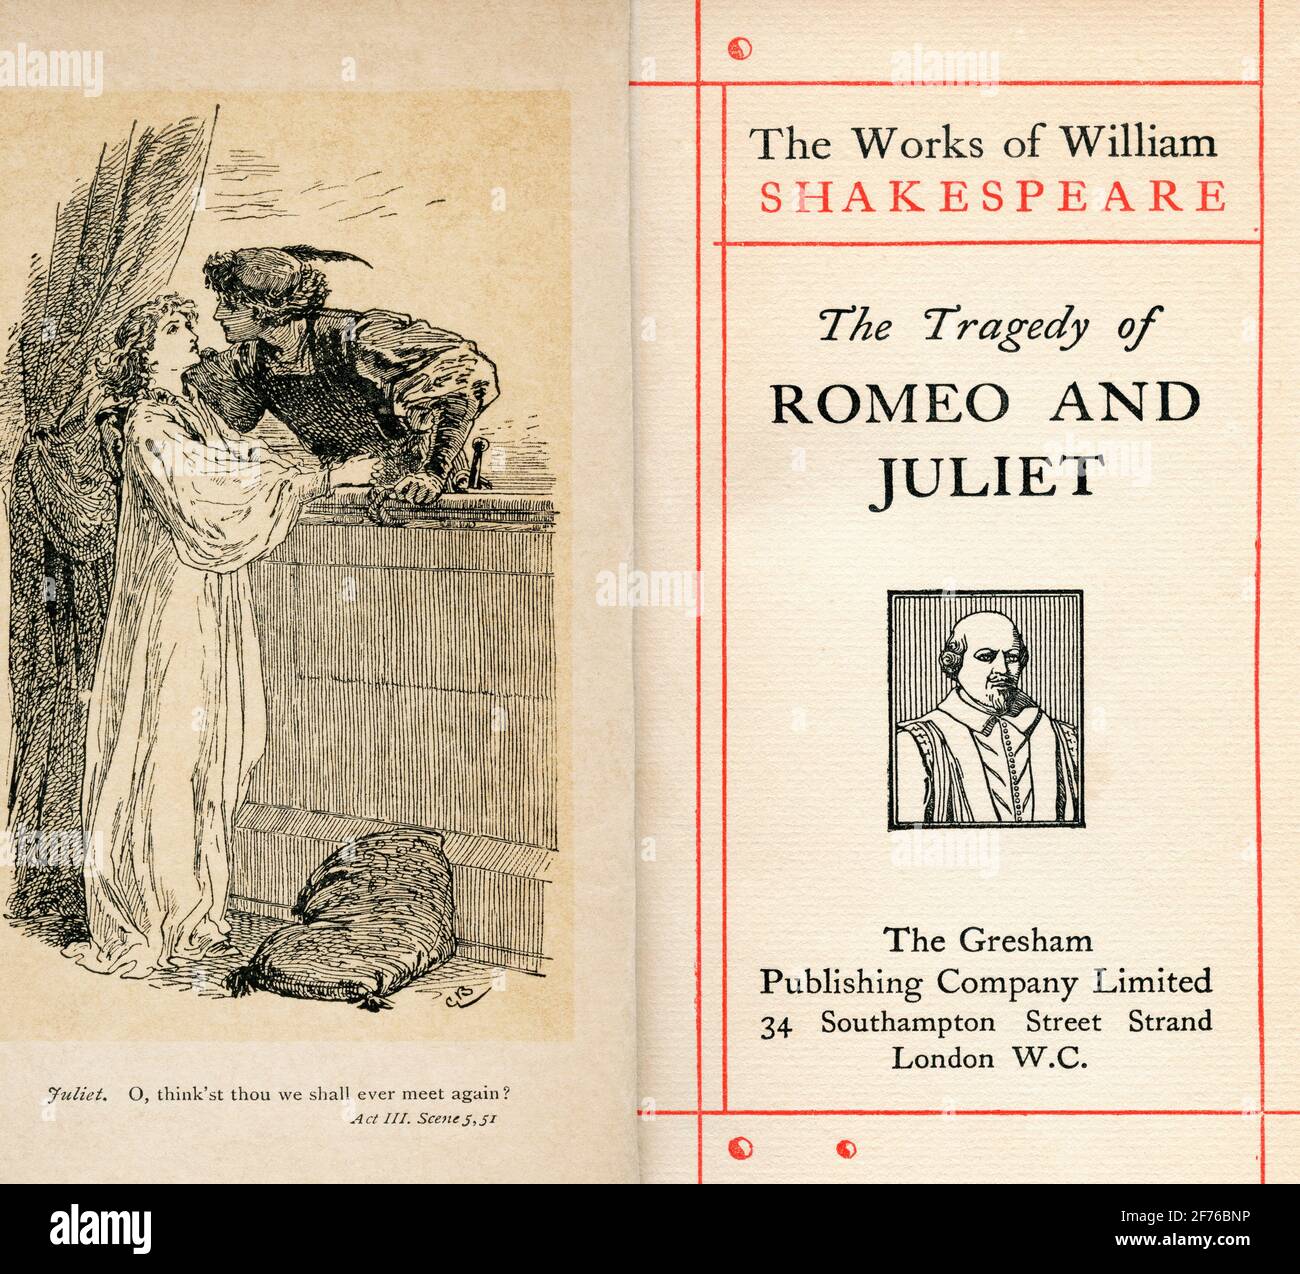 Frontispiece and title page from the Shakespeare play Romeo and Juliet.  Act III. Scene 5.  Juliet, "O, thinks't thou we shall ever meet again?"  From The Works of William Shakespeare, published c.1900 Stock Photo